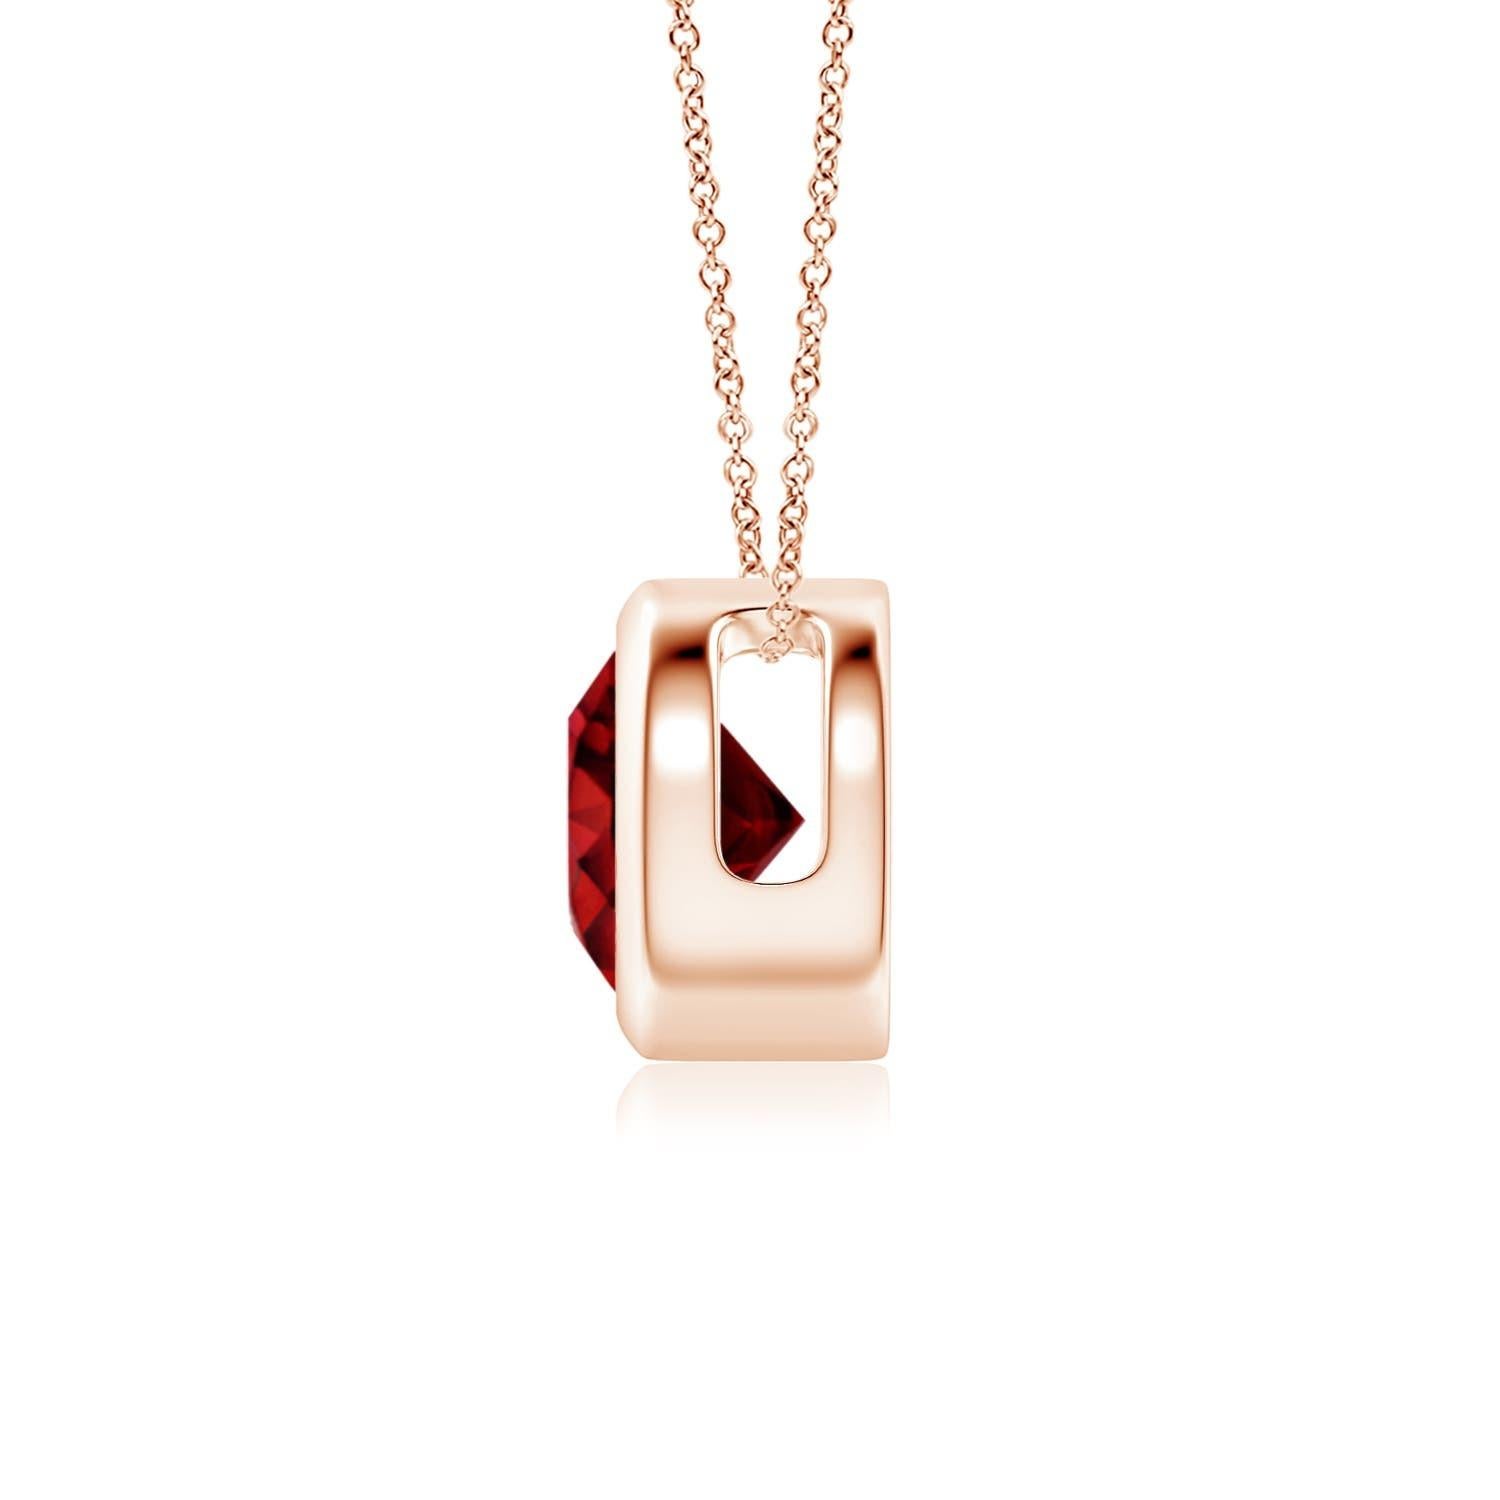 This classic solitaire ruby pendant's beautiful design makes the centre stone appear like it's floating on the chain. The purplish red gem is secured in a bezel setting. Crafted in Platinum, this dazzling round ruby pendant is simple yet